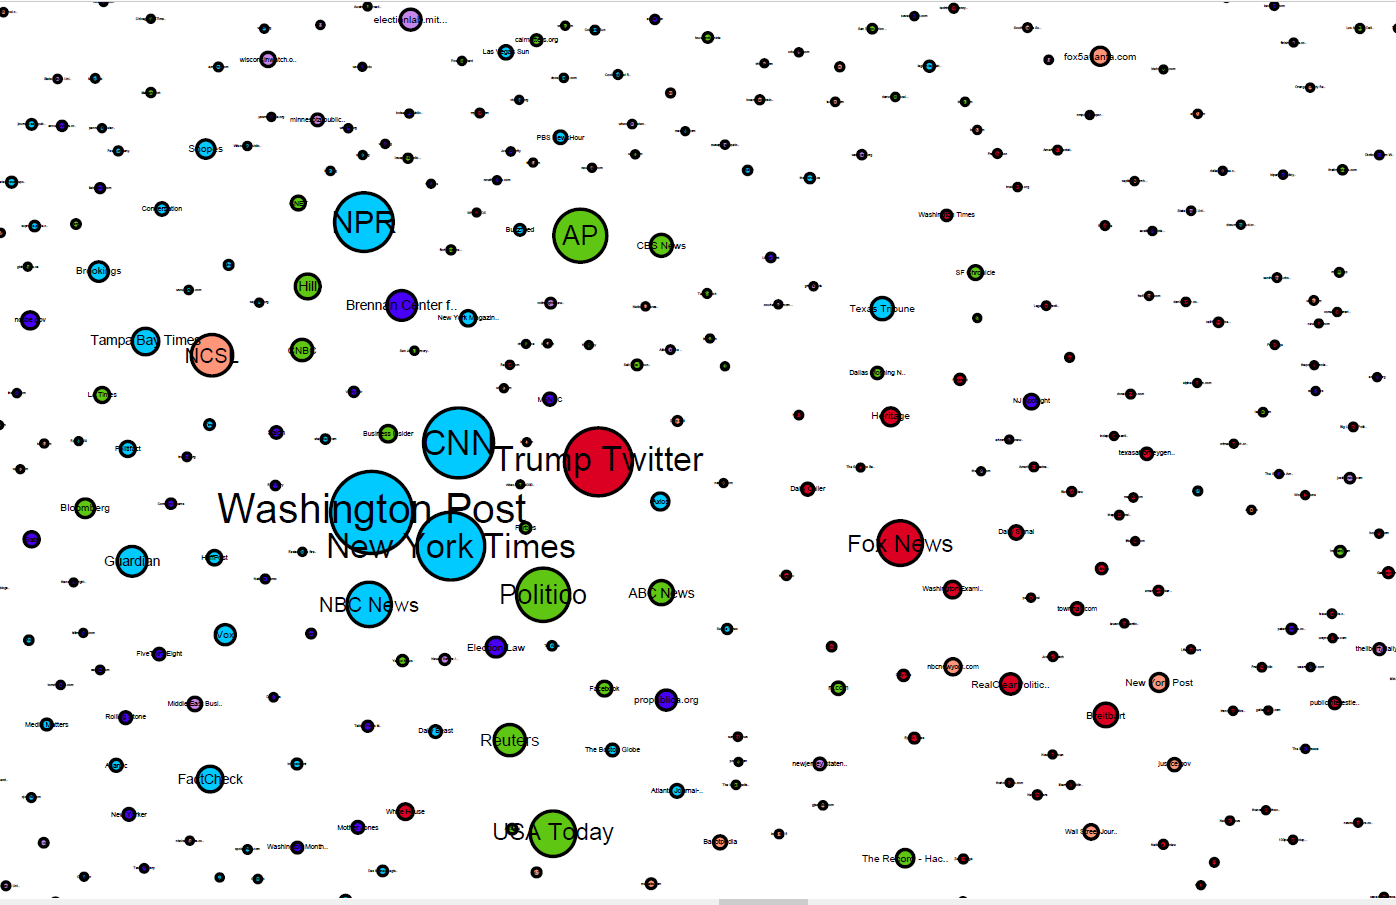 network map of discourse on mail in voting fraud